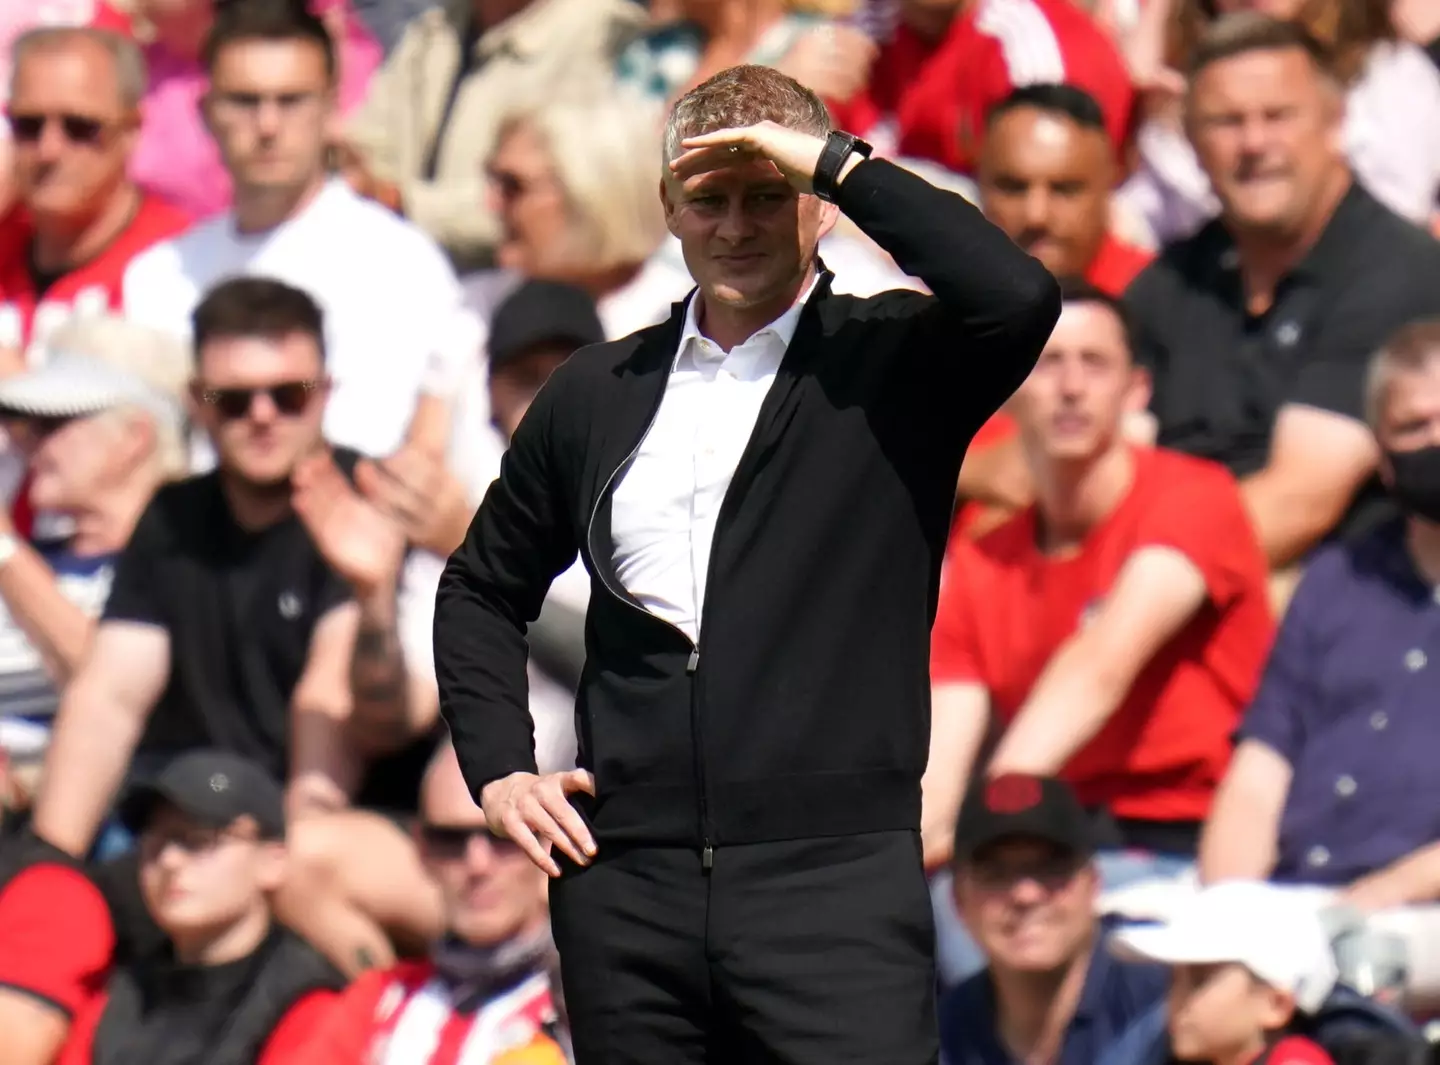 Solskjaer looks onto the St. Marys pitch during the 1-1 draw.